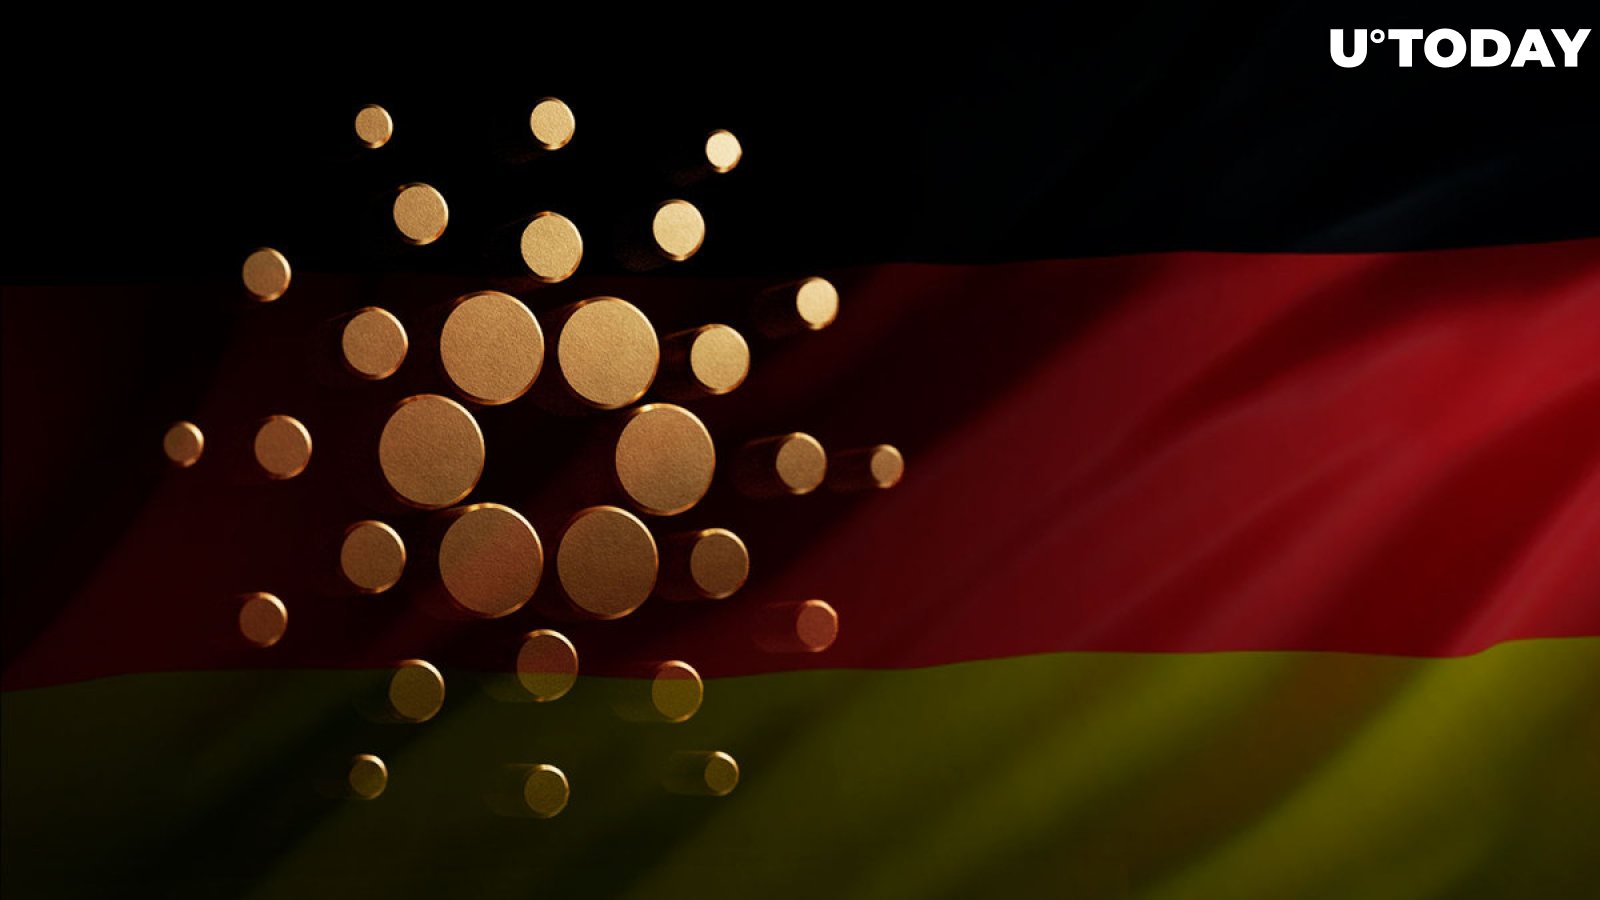 Cardano Investment Products Now Available to Clients of Major German Banks